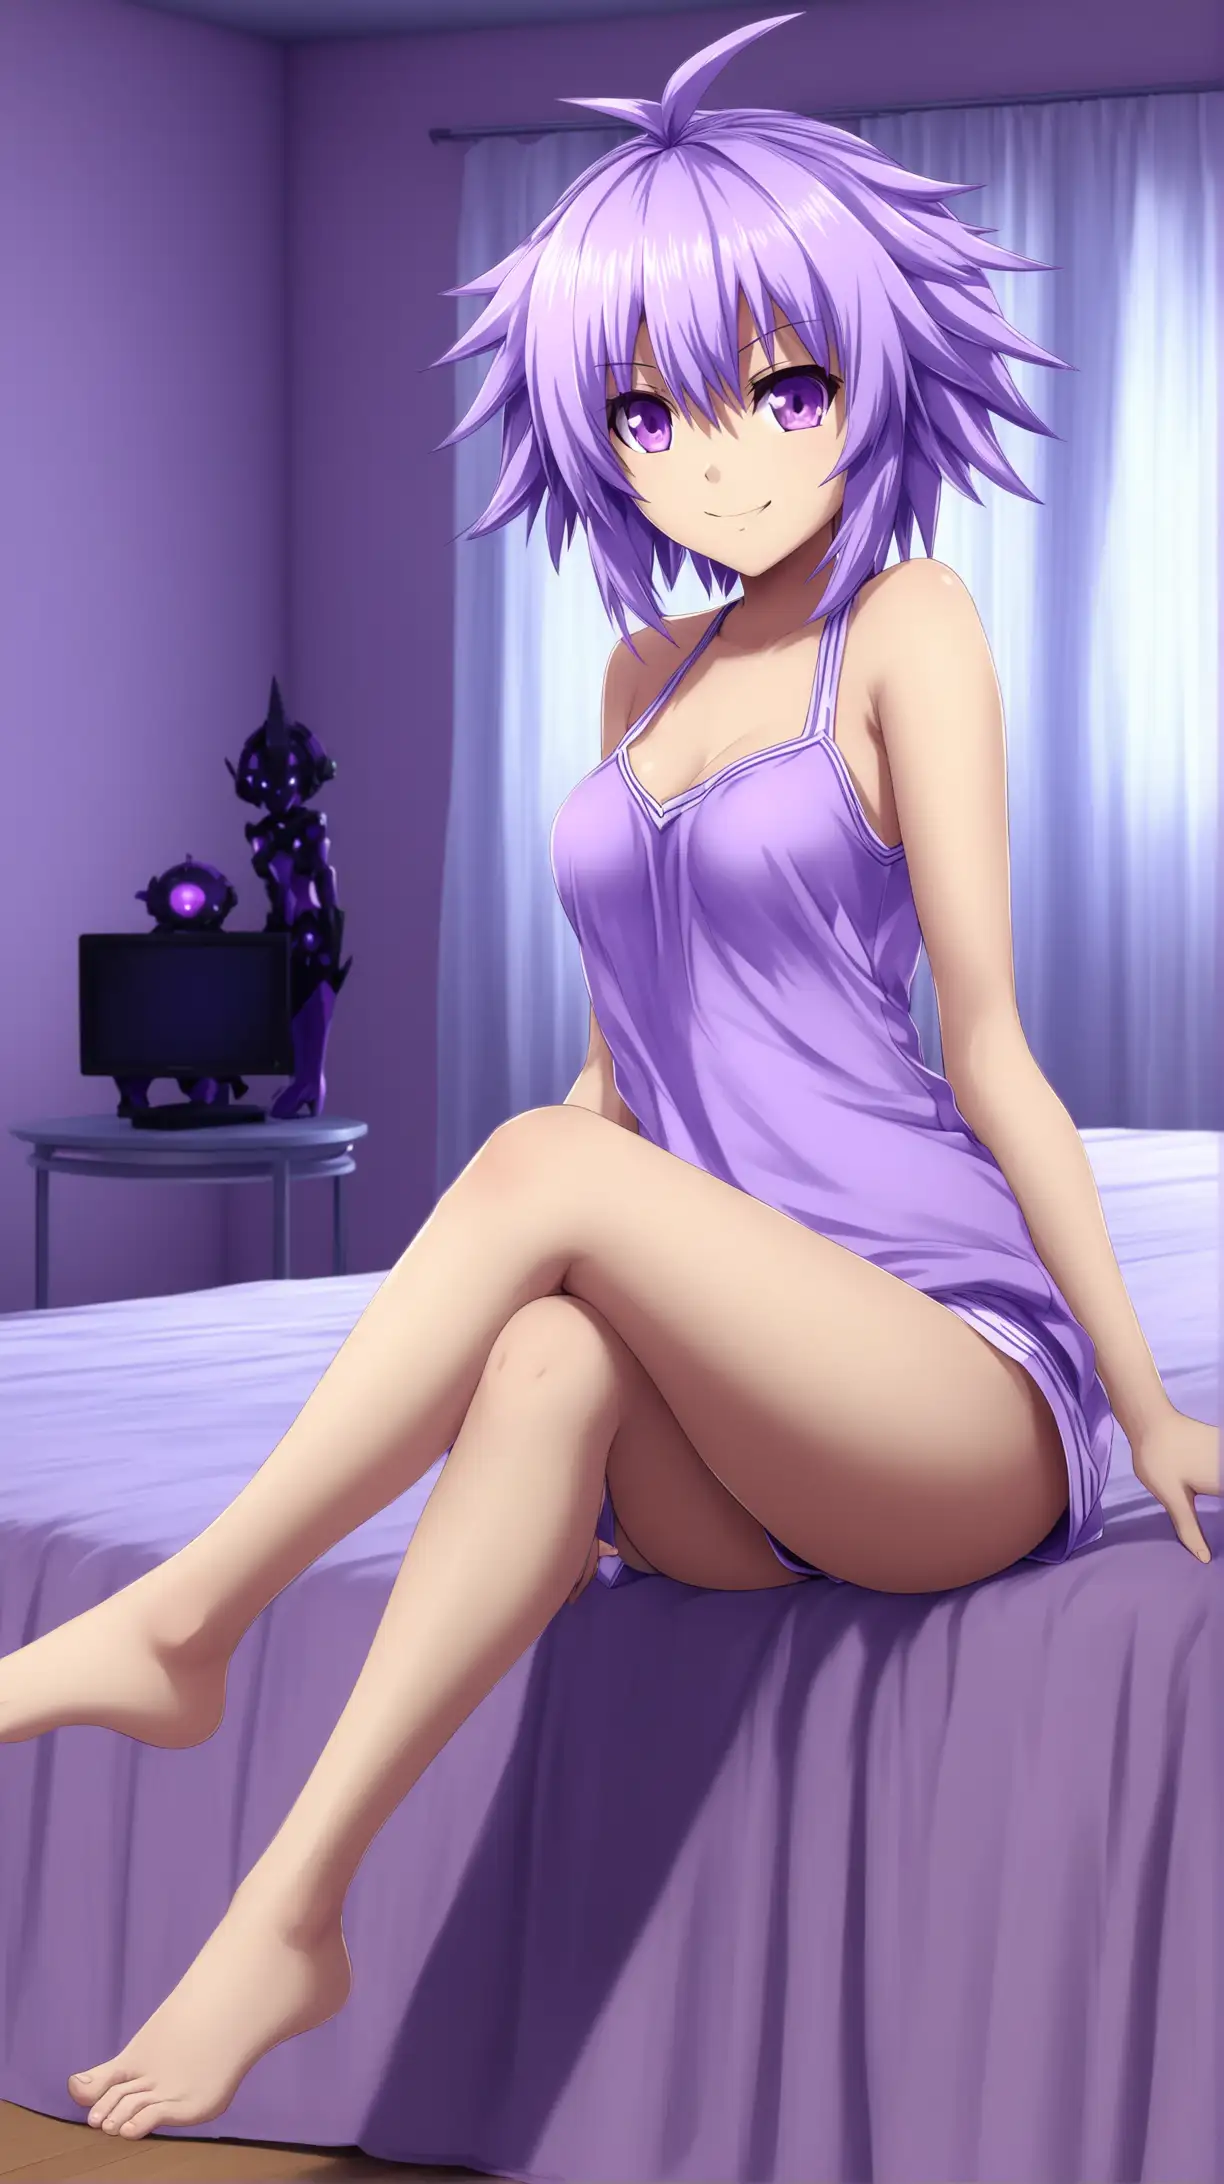 Draw a high quality picture of Neptune from Hyperdimension Neptunia, short lavender hair, purple eyes, lively, perky figure, ambient lighting, long shot, seductive pose, sitting, indoors, bedroom, scanty casual outfit, legs spread, smiling at the viewer